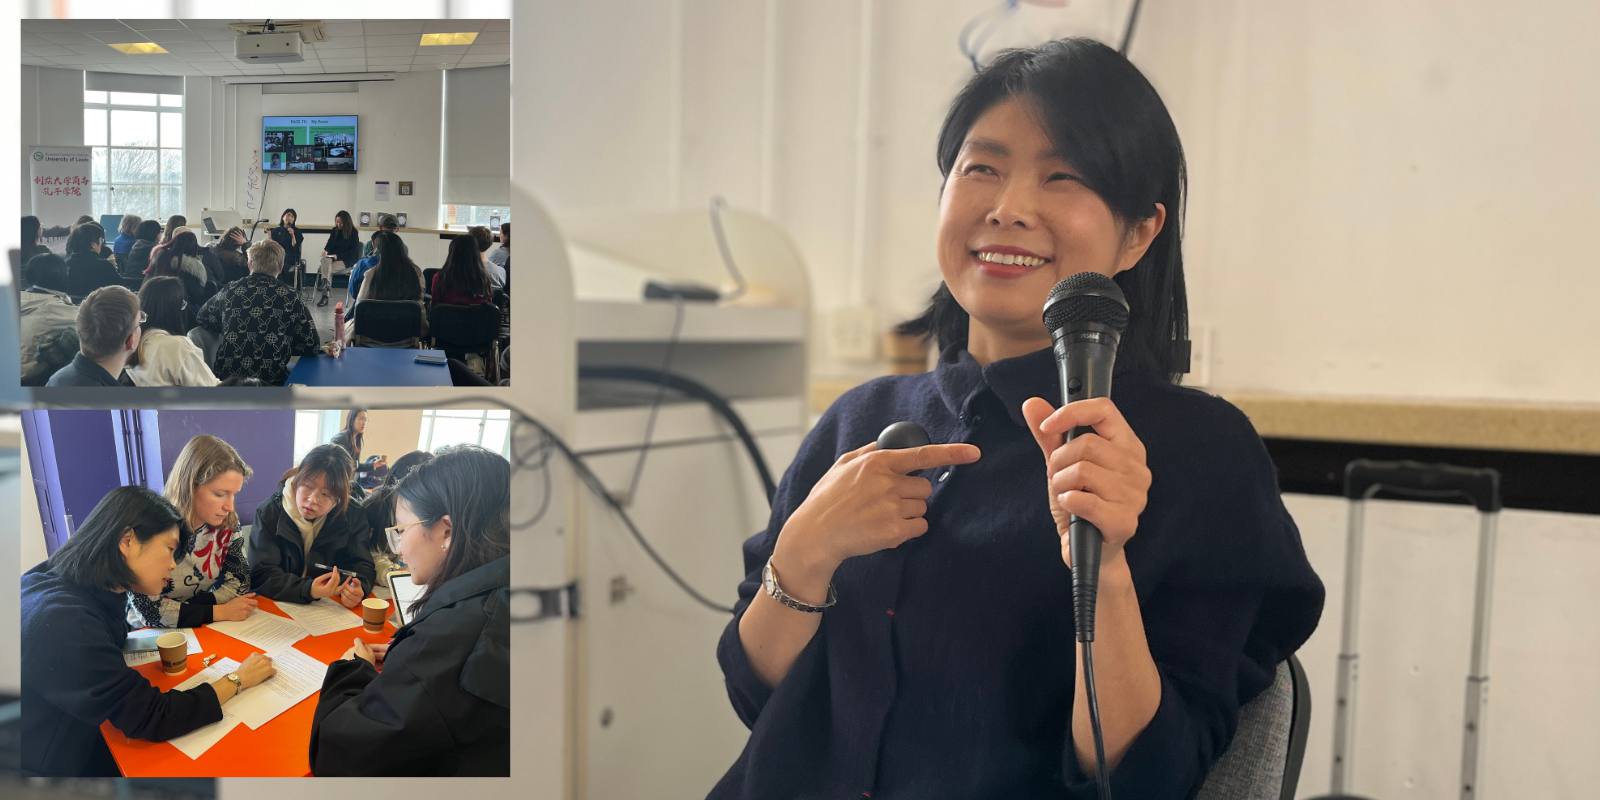 Author Lu Min smiling holding a microphone, with two images inset showing a full room listening to her speak and a group of people working together at a table.